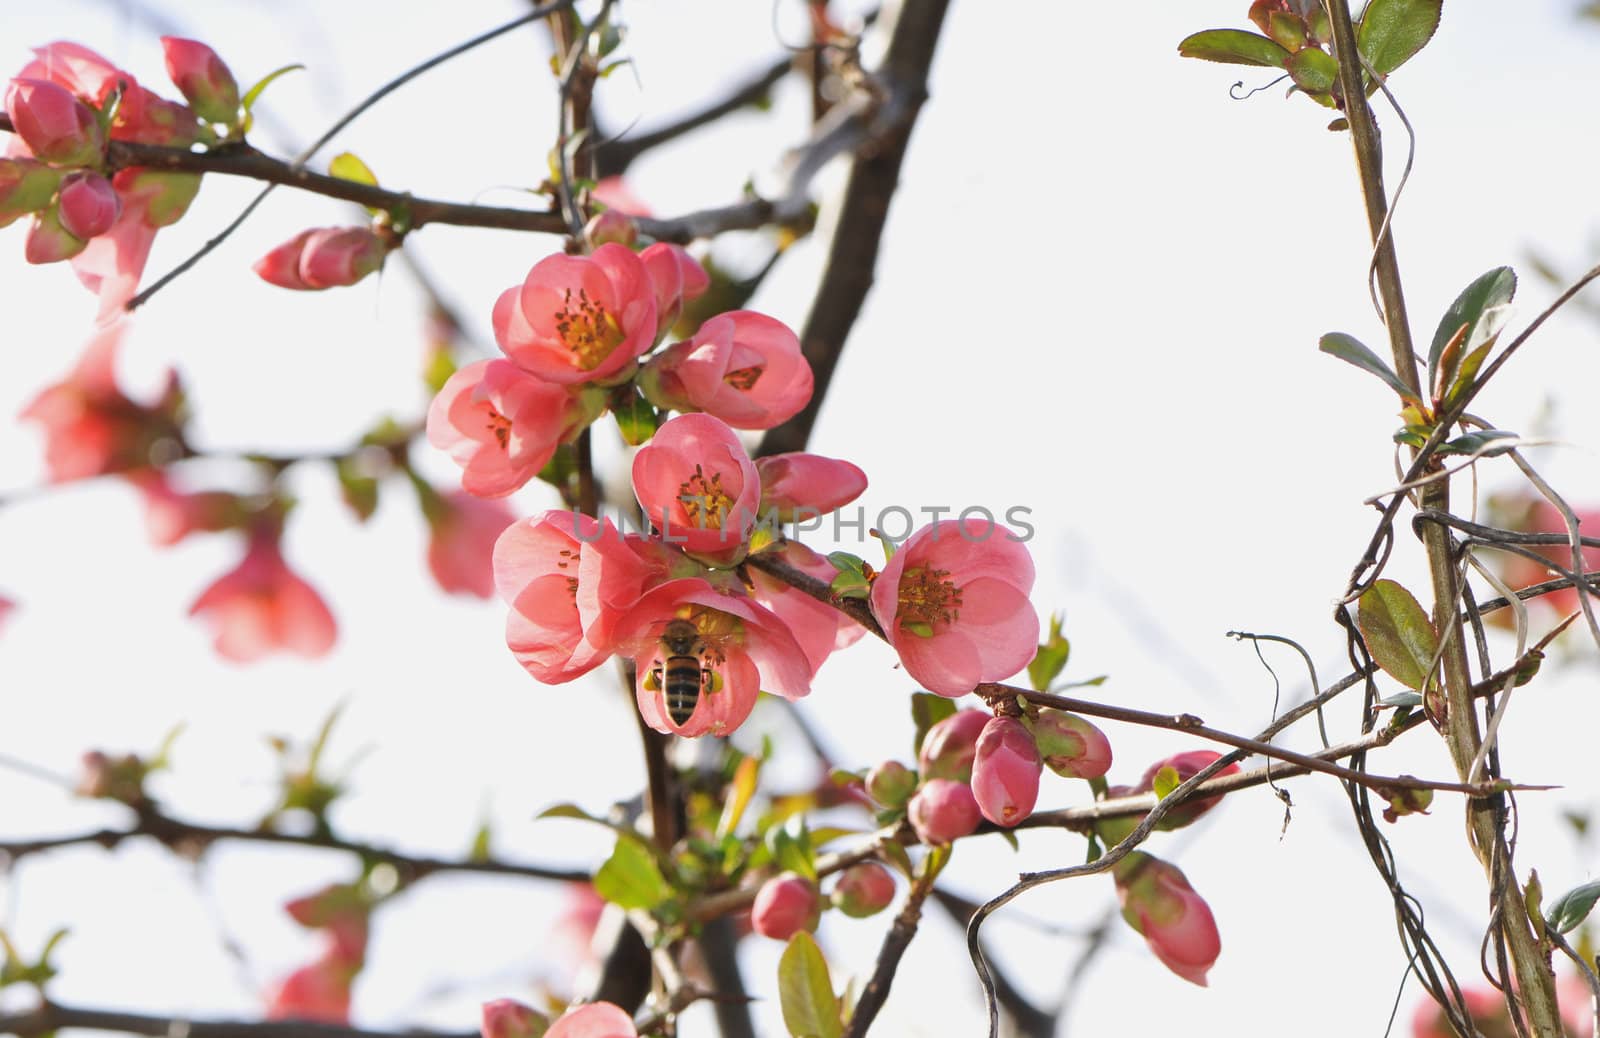 Some pink flowers of a tree with a bee inside one by shkyo30